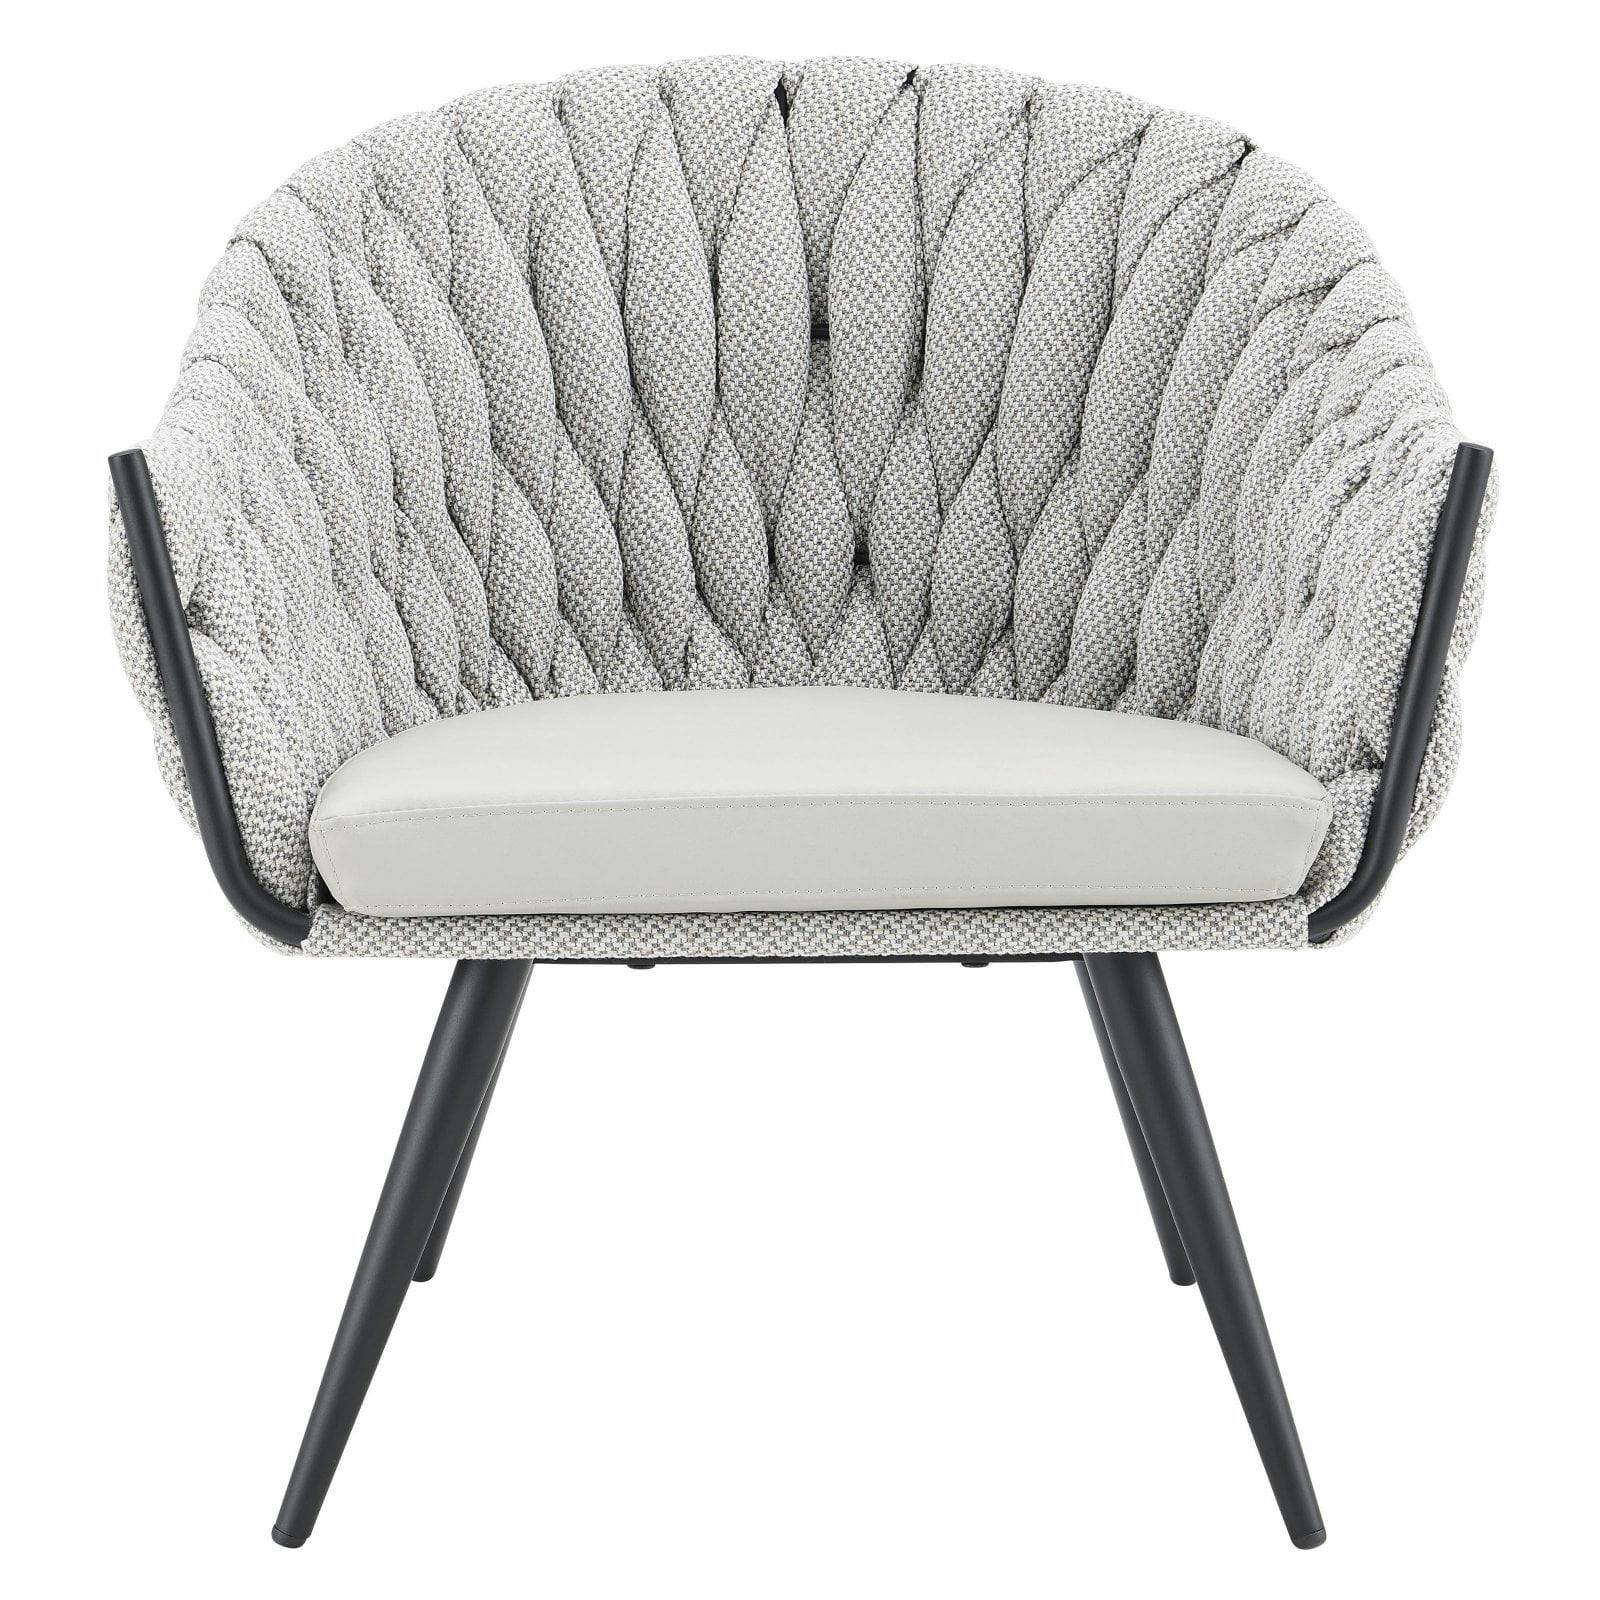 Fabian Light Gray Basketweave Accent Chair with Faux Leather Cushion